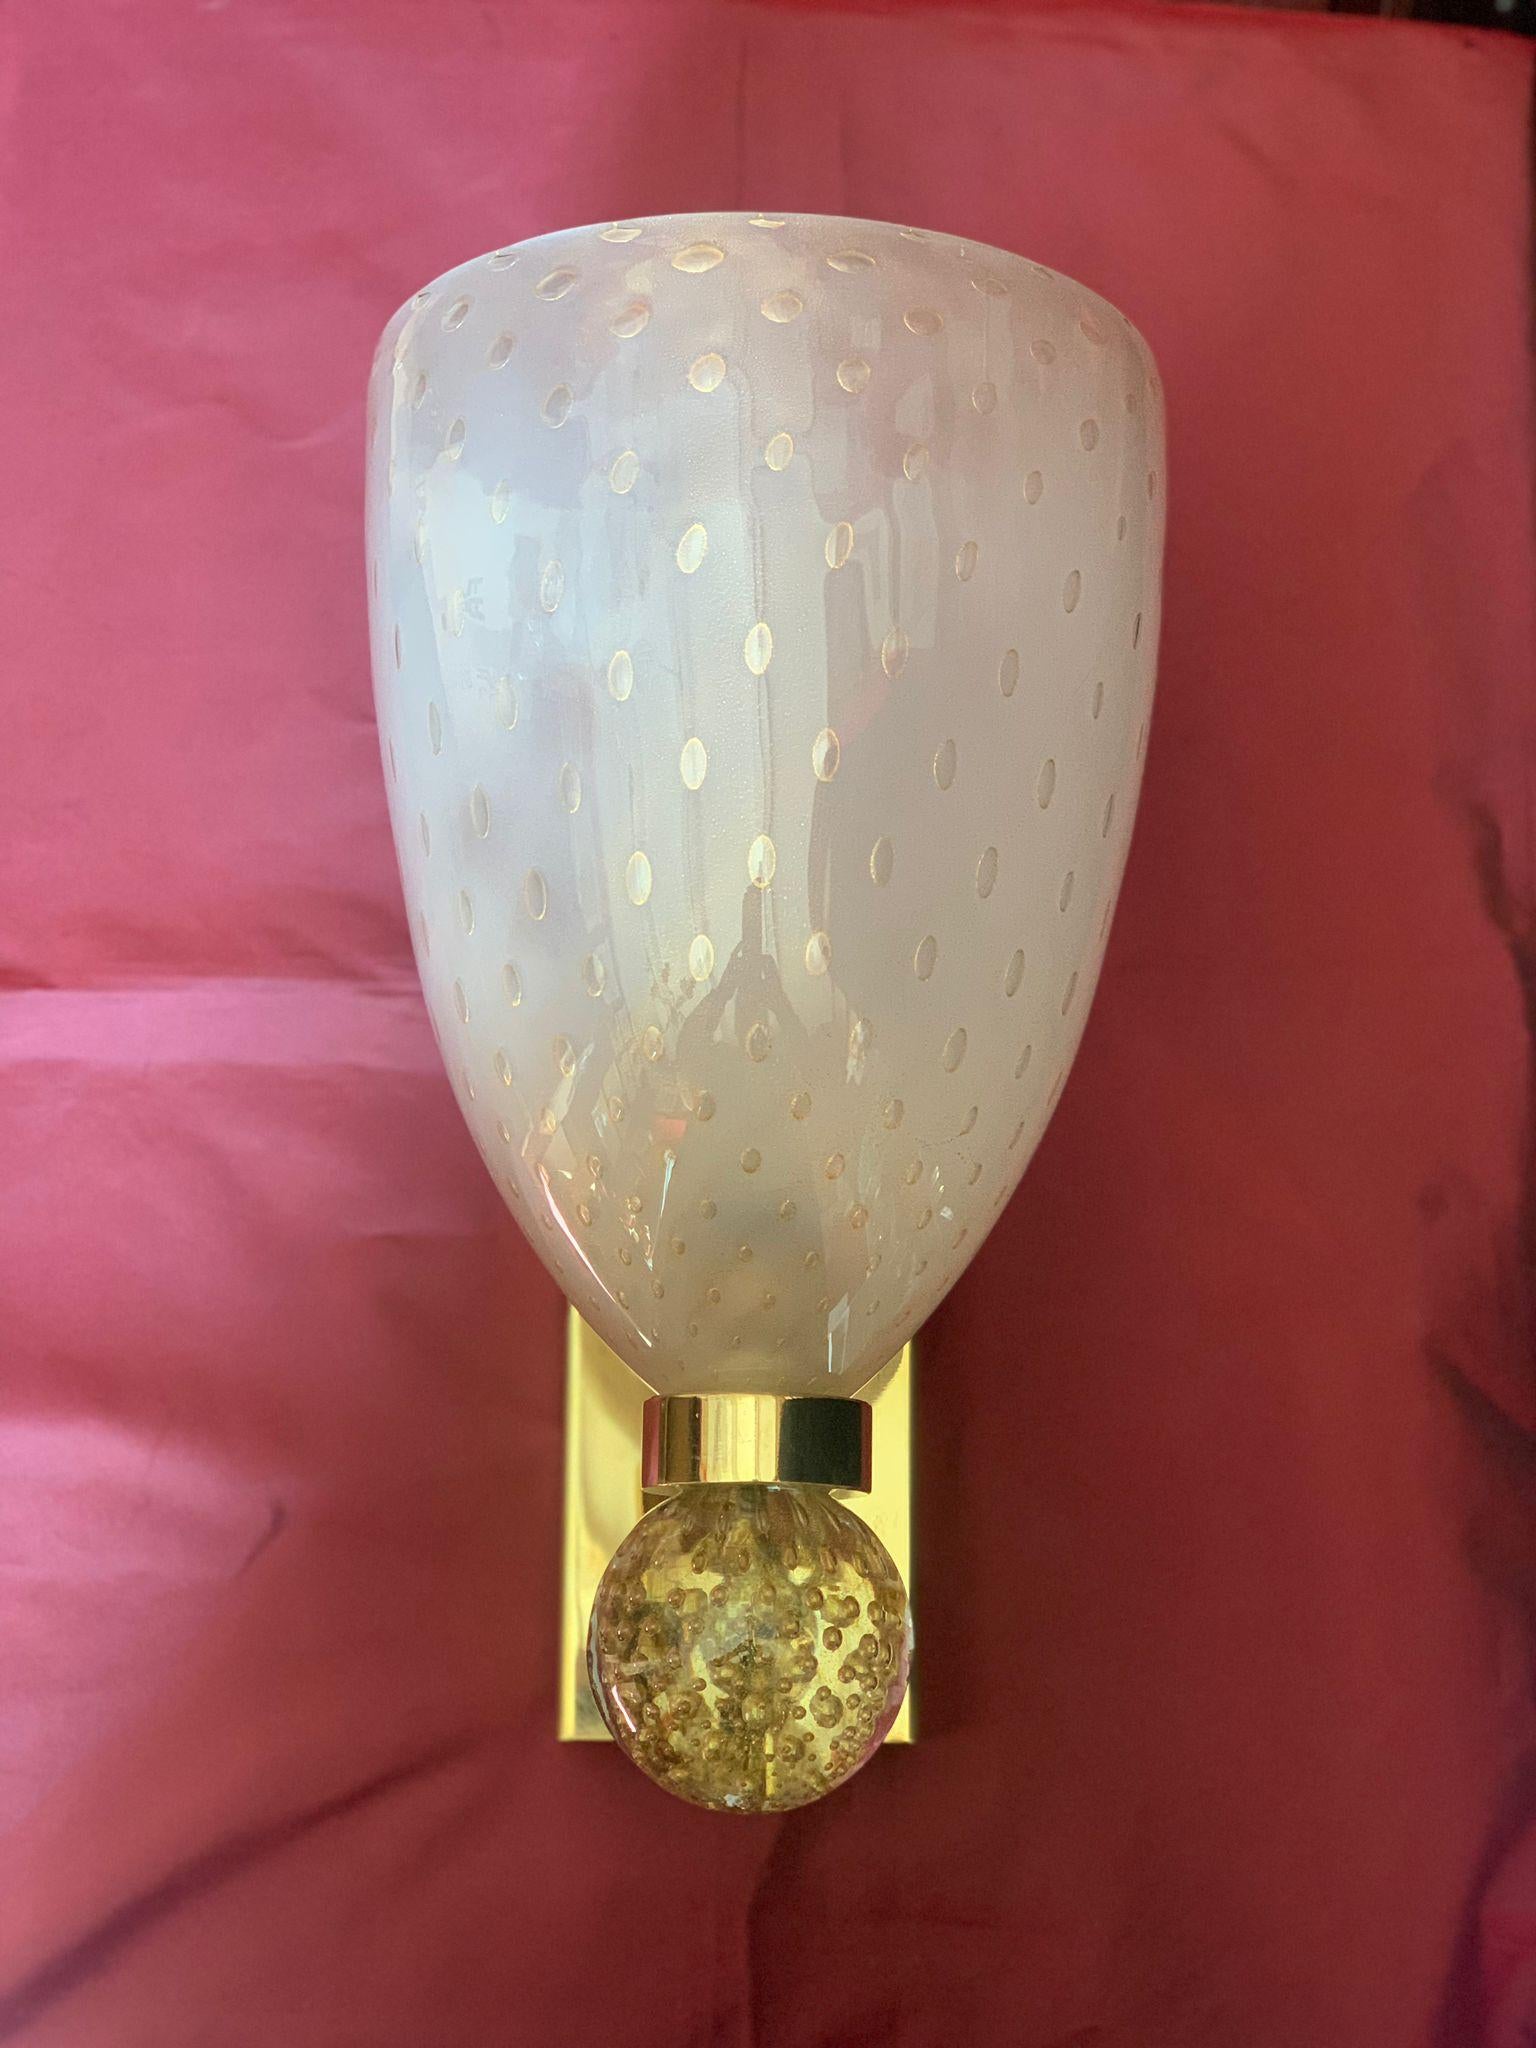 Italian Luxurious Pair of Wall Lamps by Barovier & Toso, Murano, 1960s For Sale